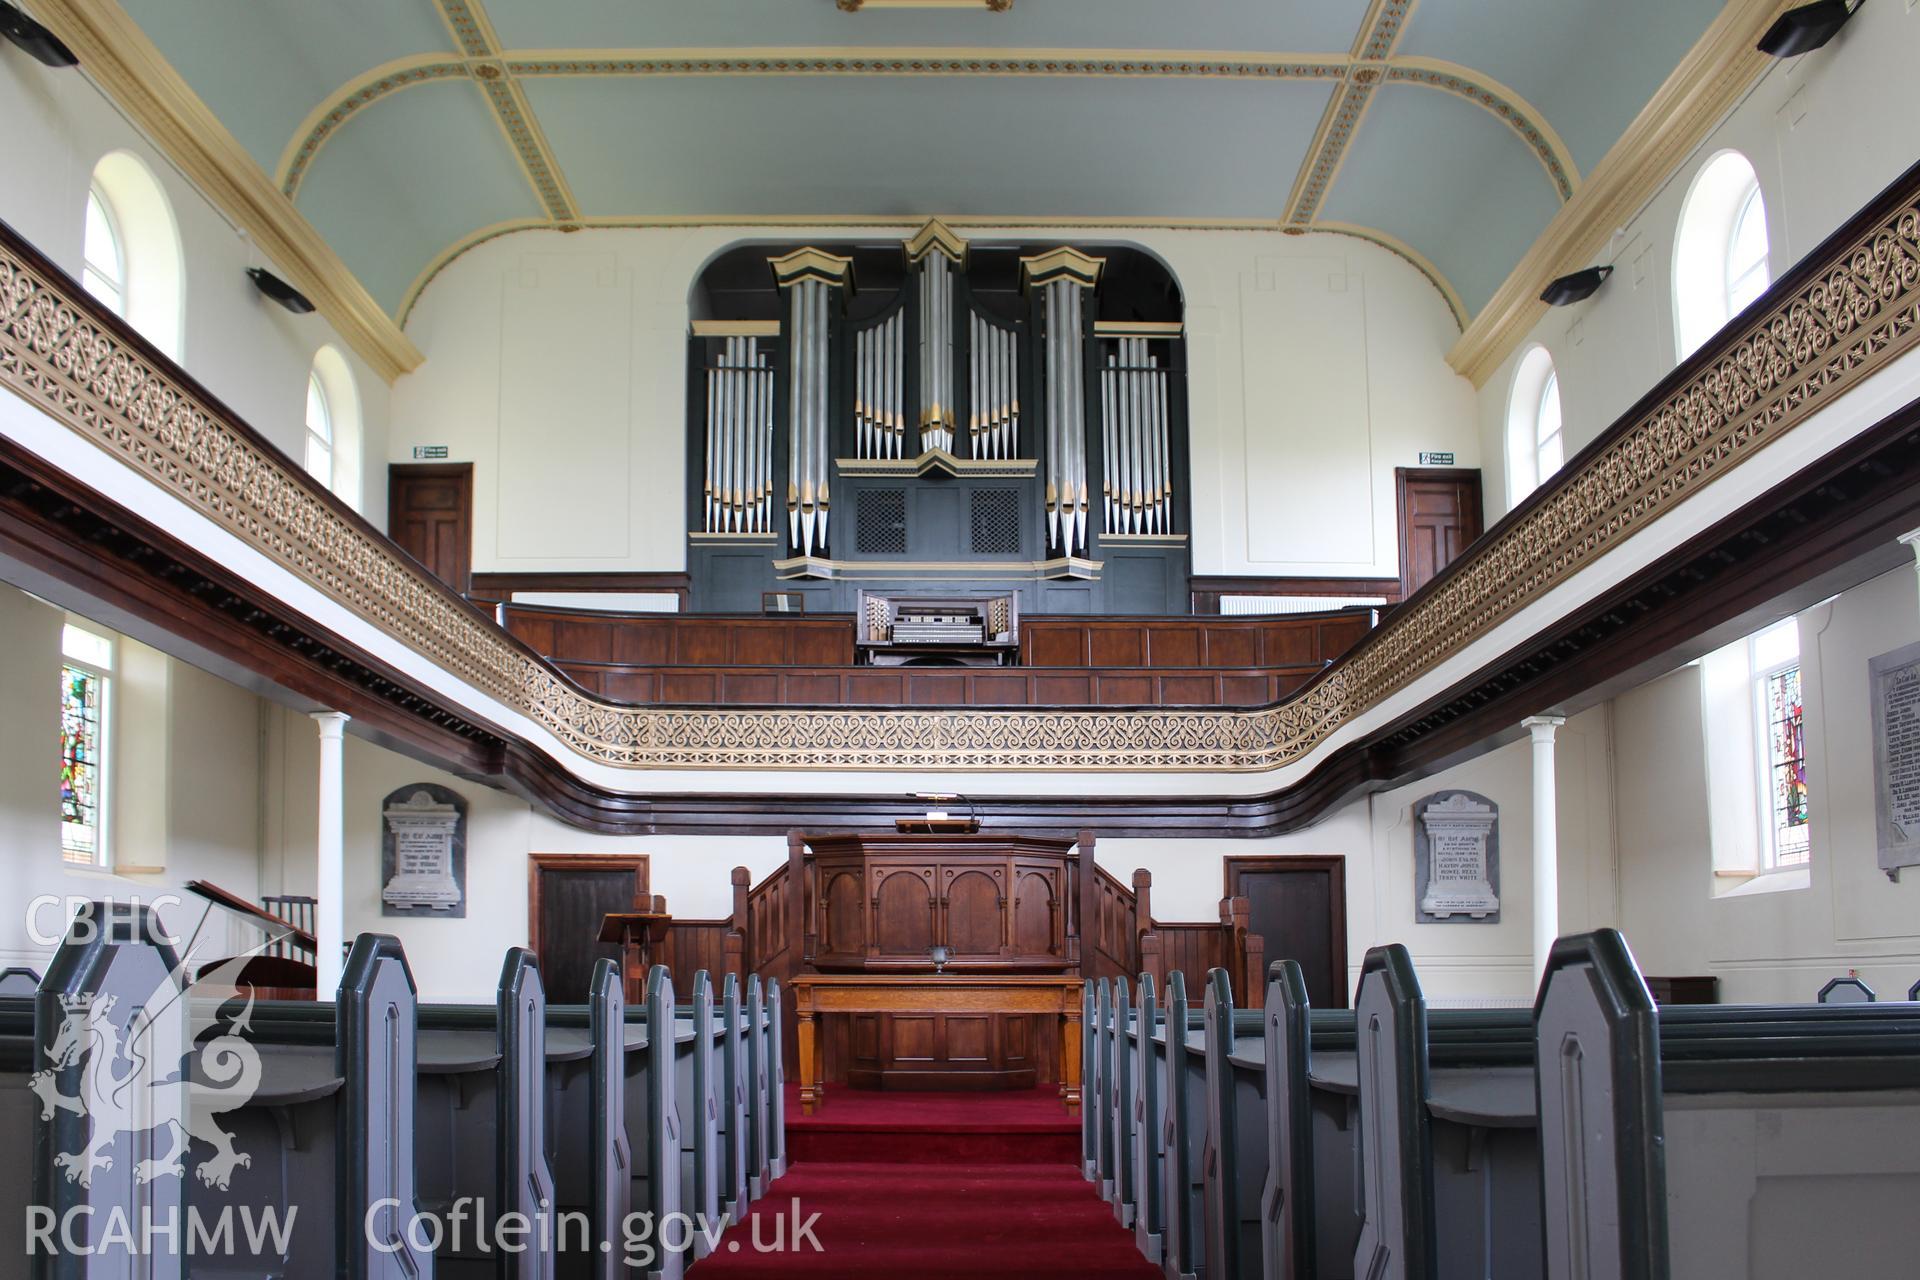 Colour photograph showing interior view looking towards organ at Mynydd-Bach Independent Chapel, Treboeth, Swansea, taken during photographic survey conducted by Sue Fielding on 13th May 2017.